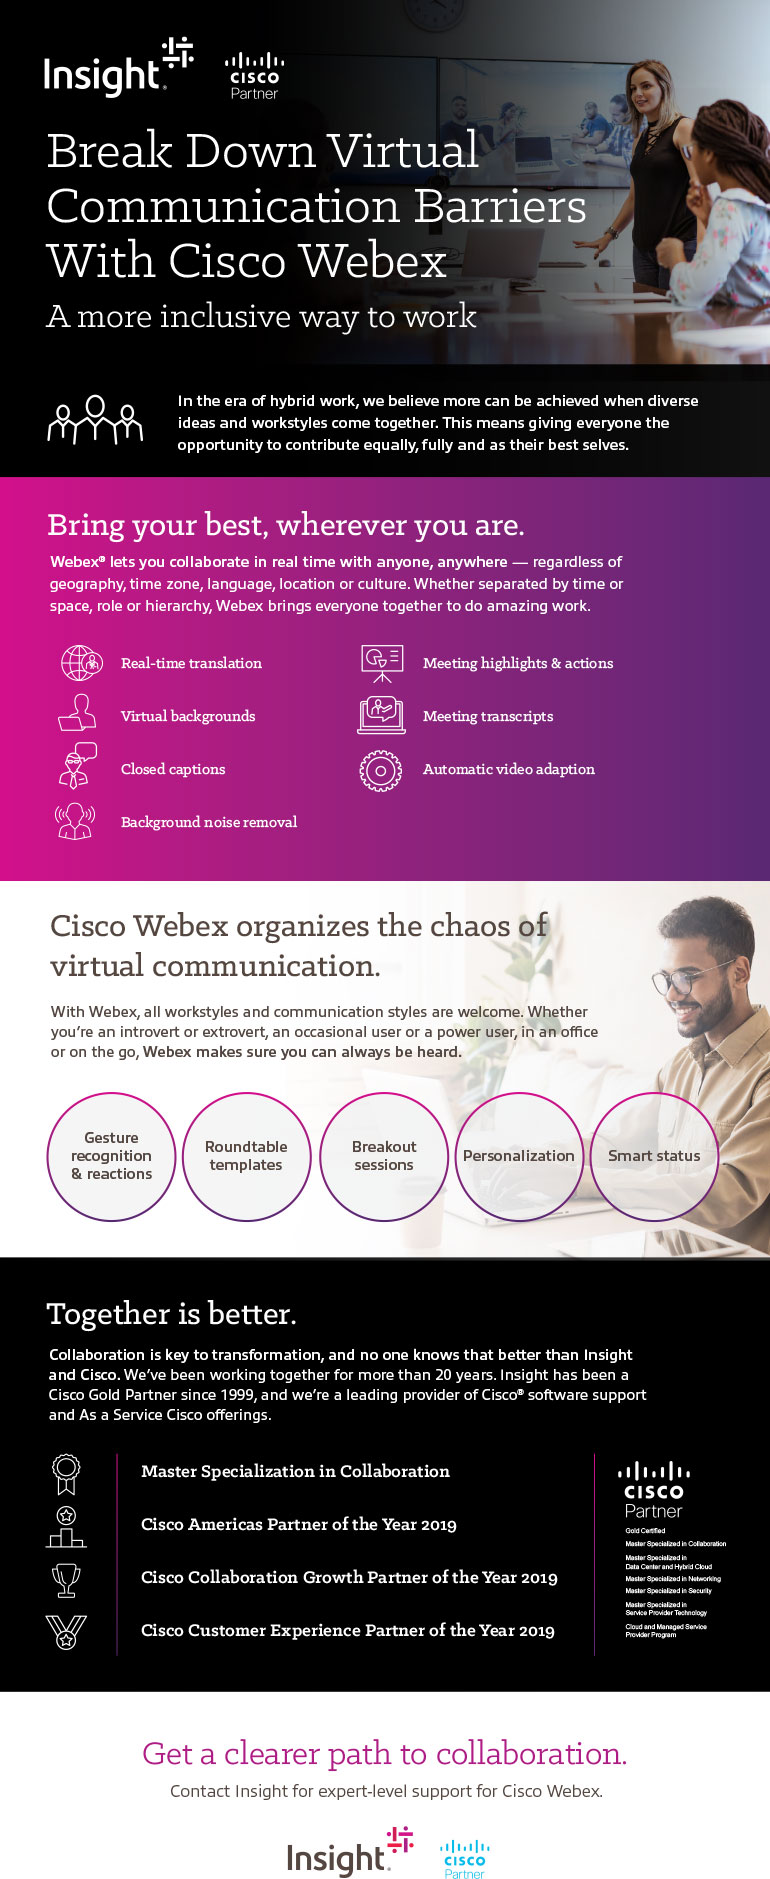 Break Down Virtual Communication Barriers With Cisco Webex as translated below